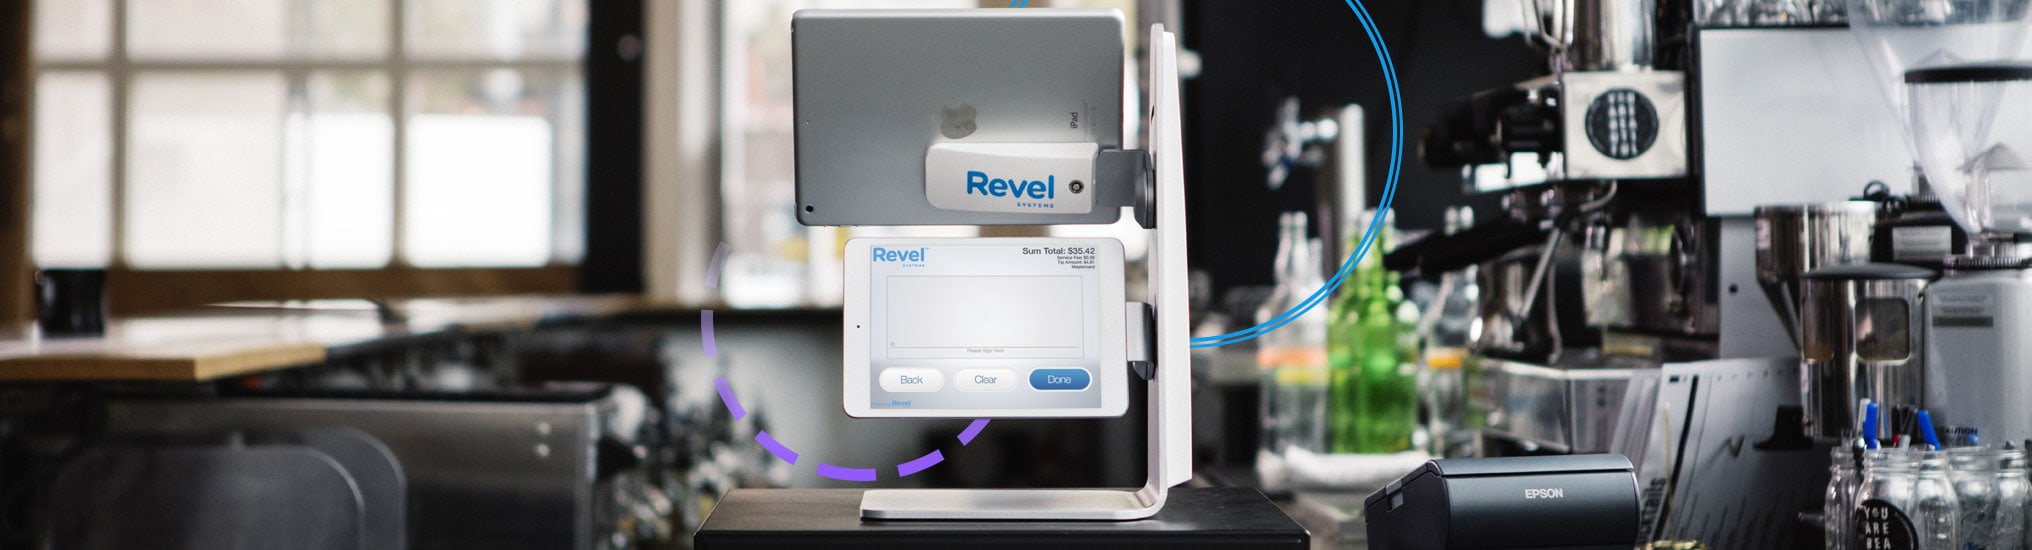 Revel Systems Page | DBS Point of Sale System